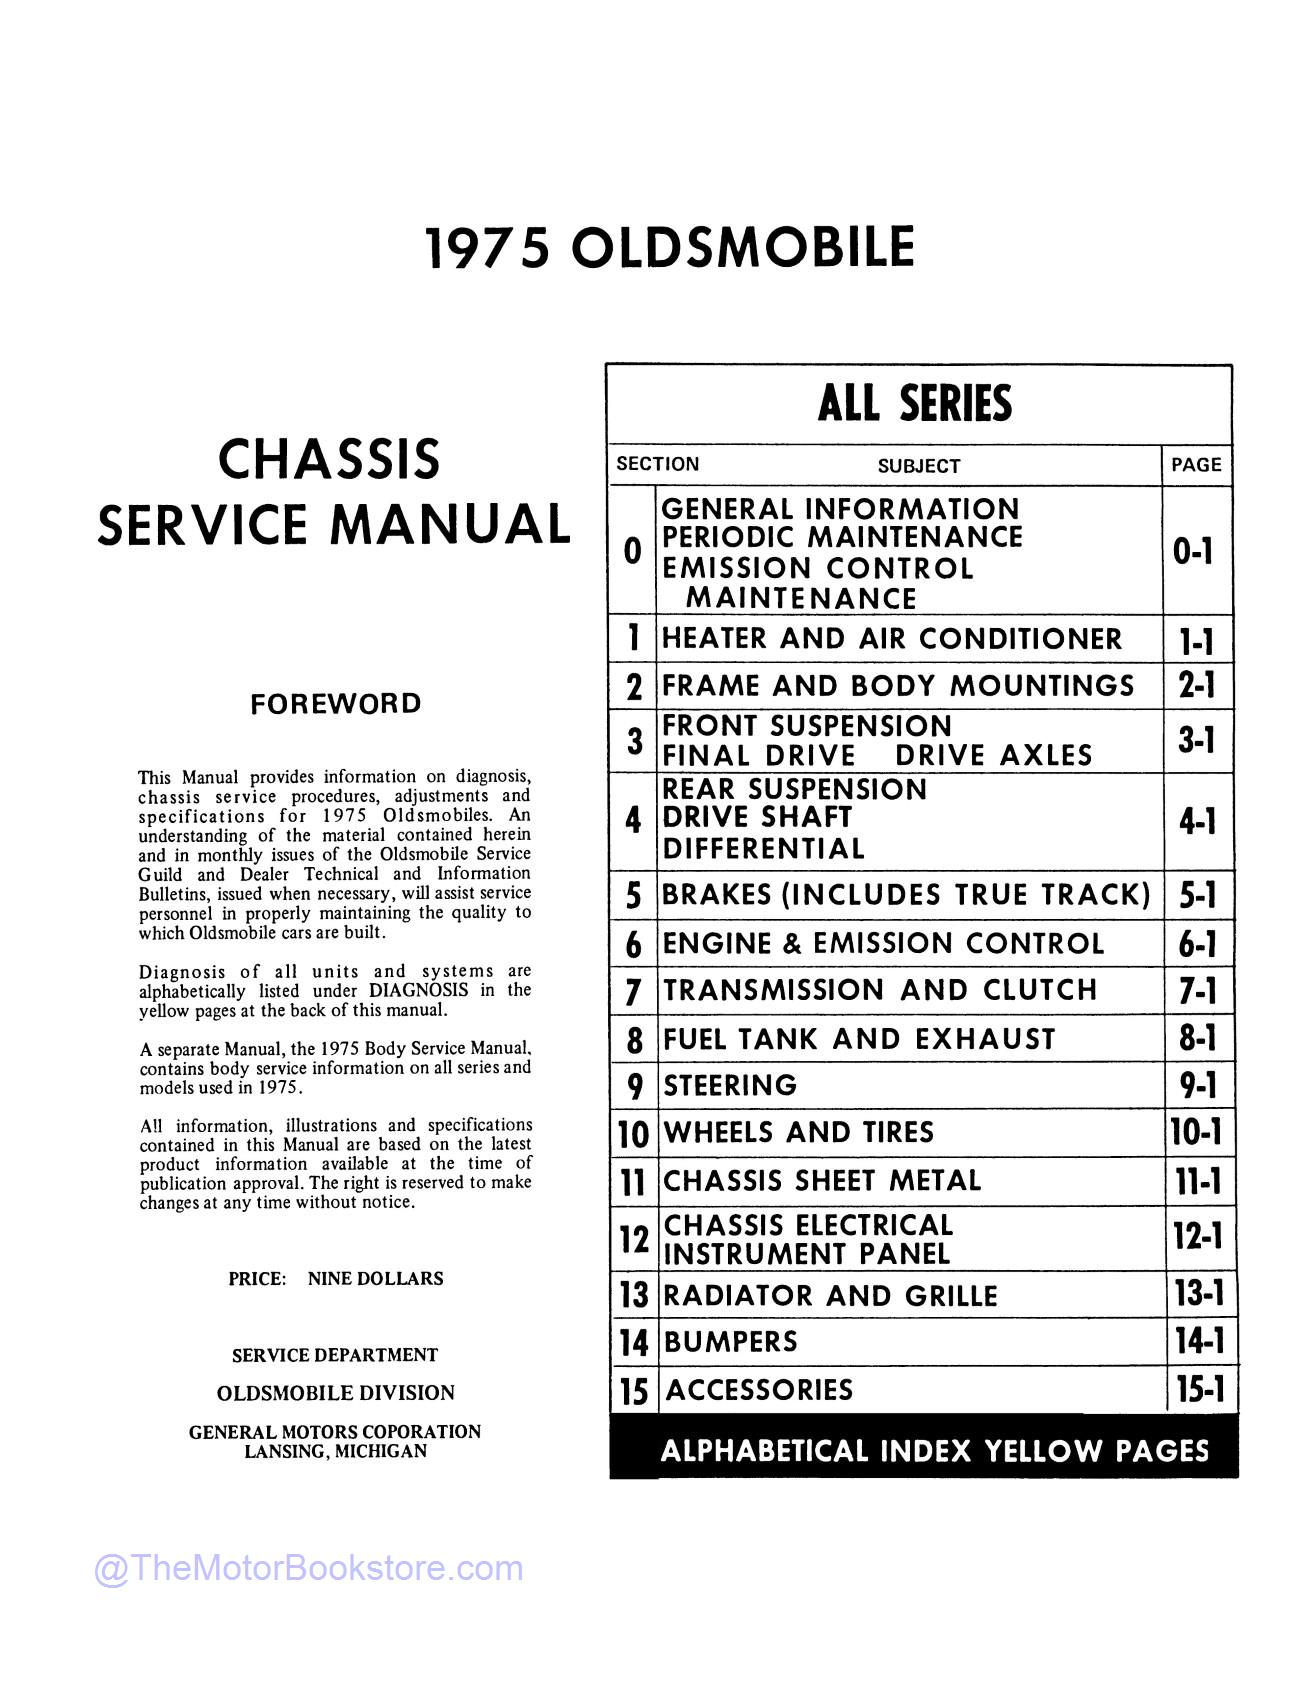 1975 Oldsmobile Service Repair Manual  - Table of Contents